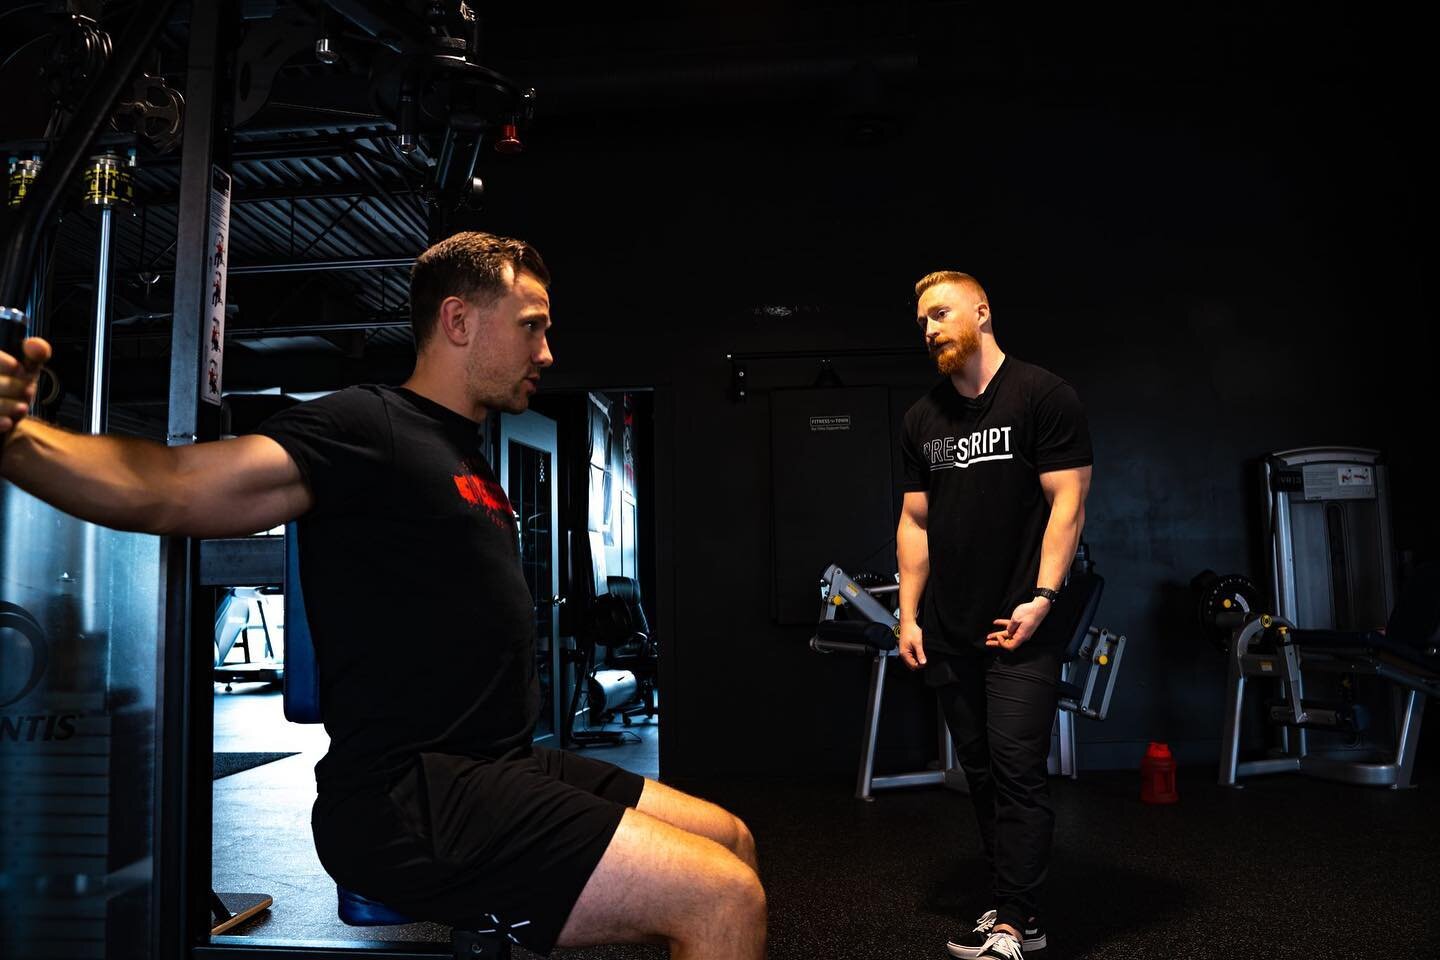 Wants and needs.

What a client wants and what they need are more similar than different.

Consistency is a byproduct of enjoyment.

We know a stupid amount about exercise, training principles, and biomechanics, but none of it matters if your client 